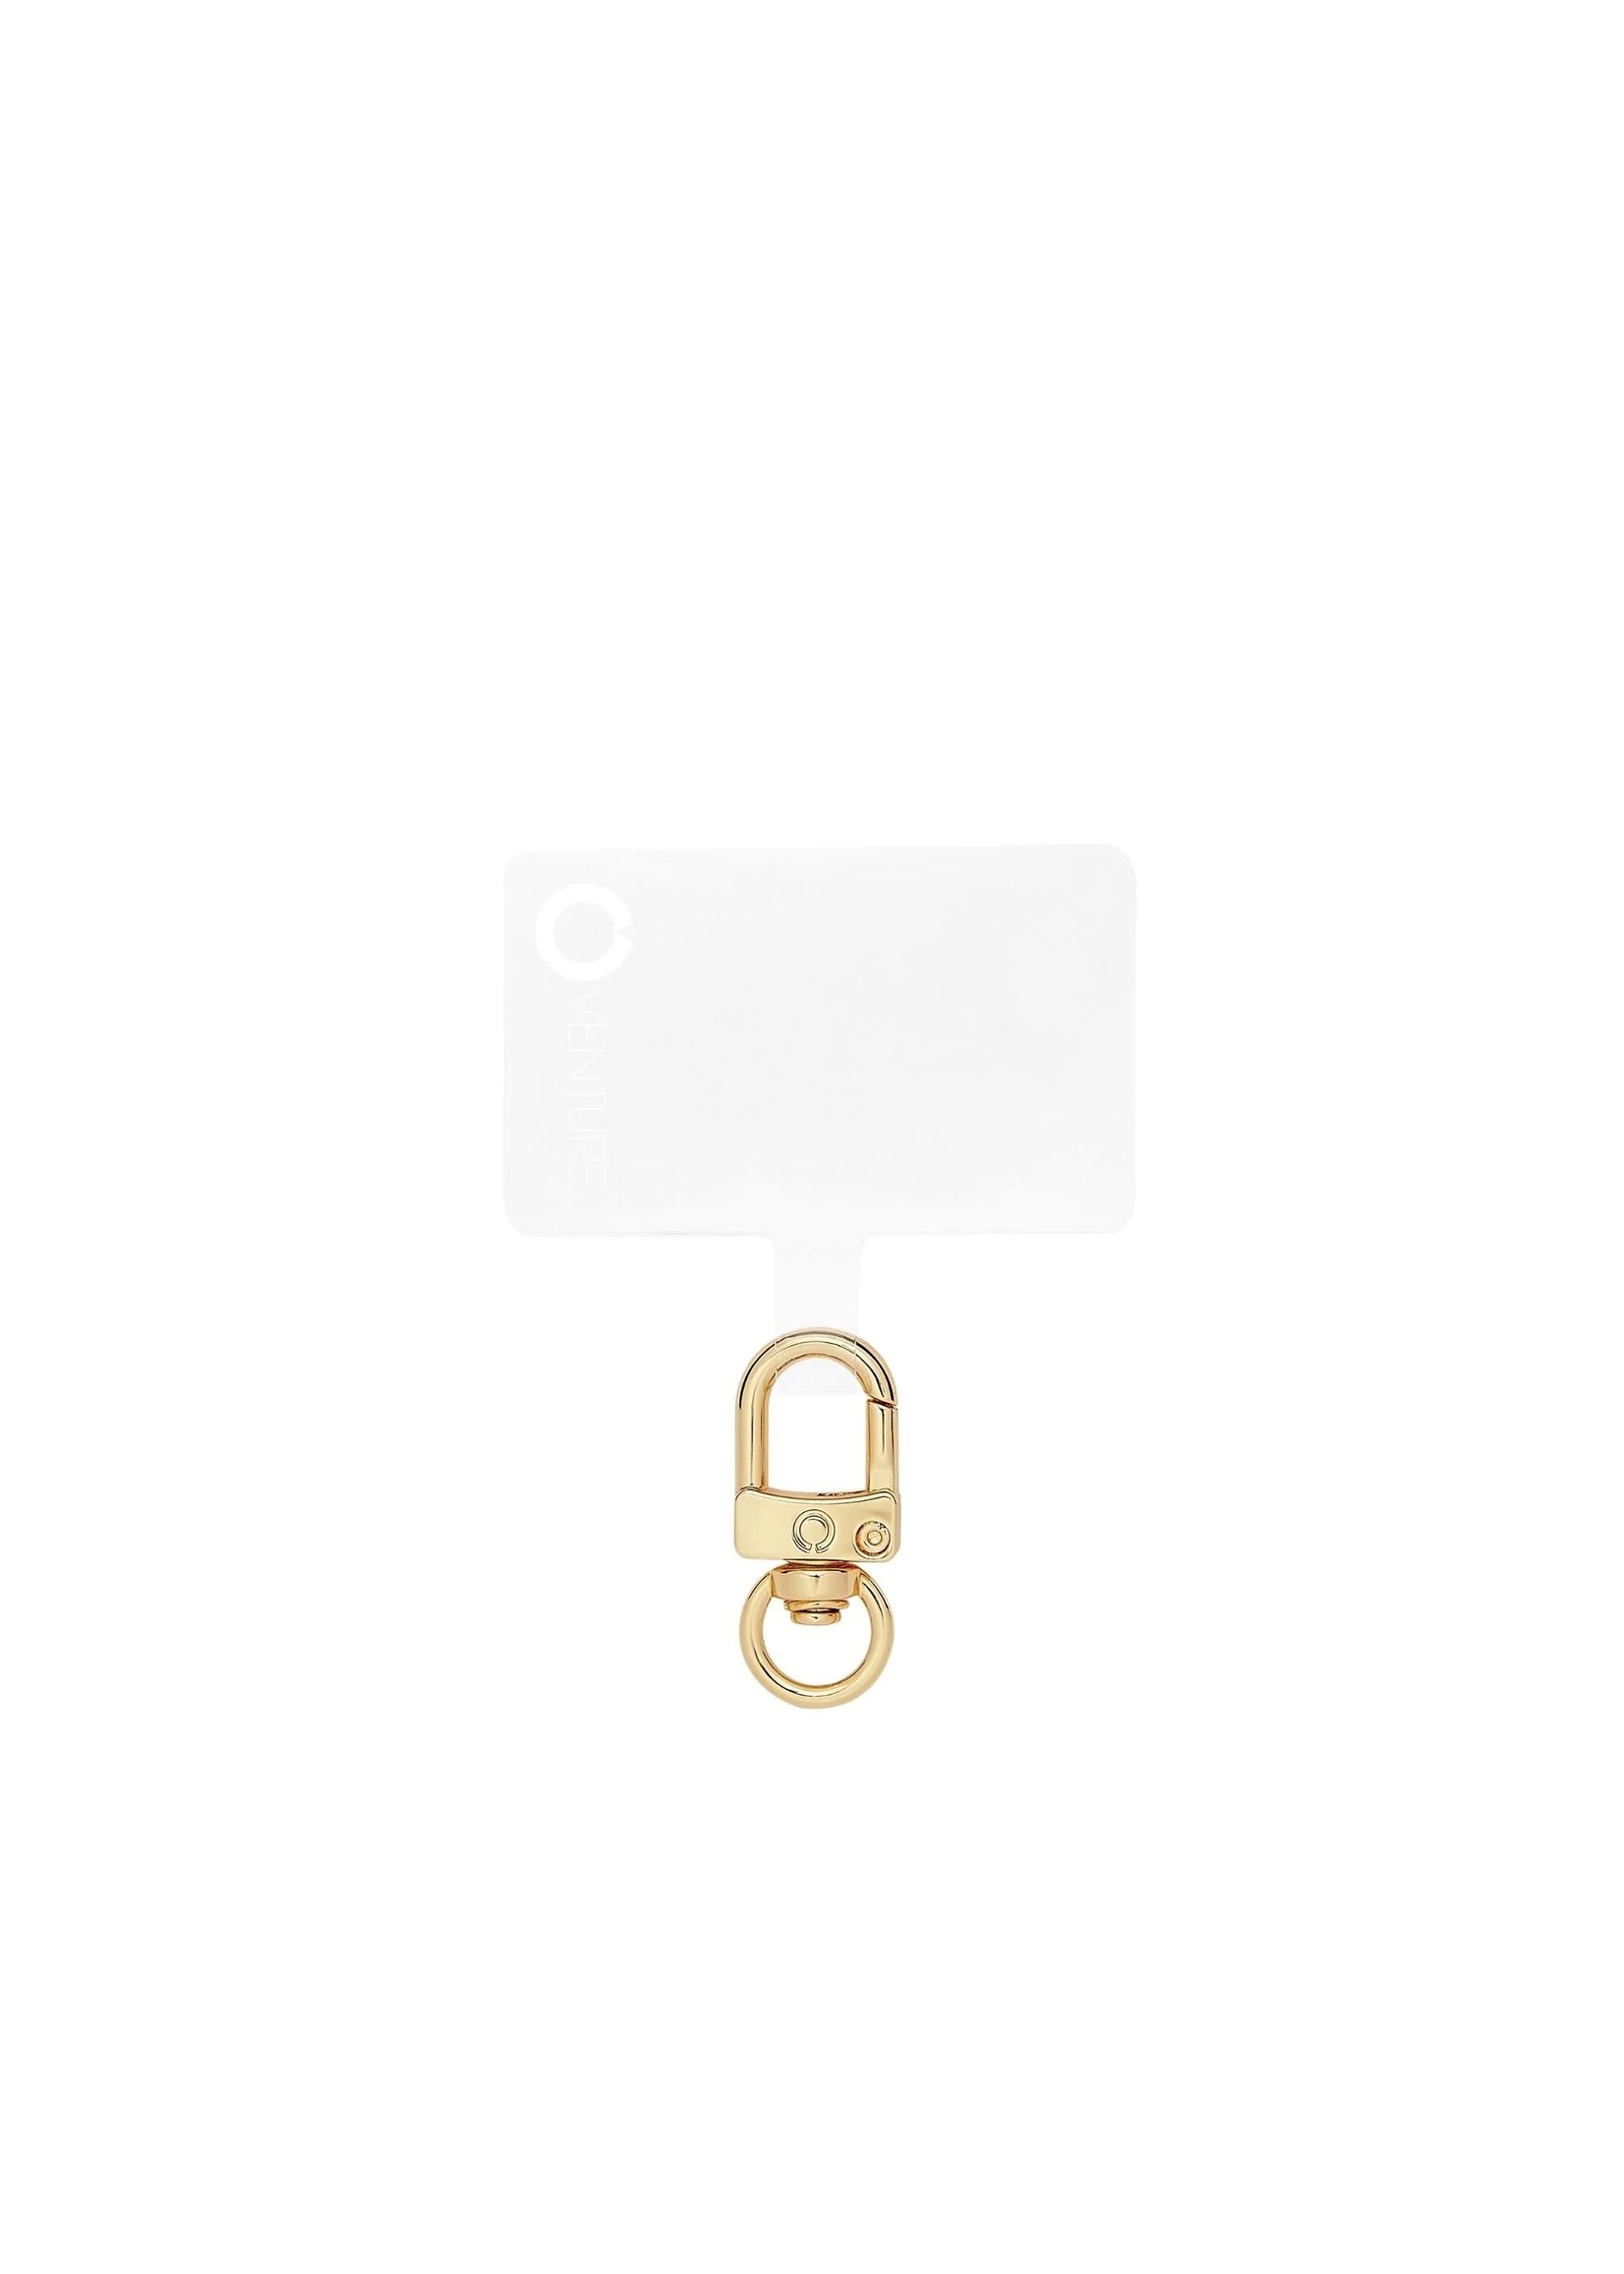 Oventure The Hook Me UpTM Universal Phone Connector Collection Gold Rush